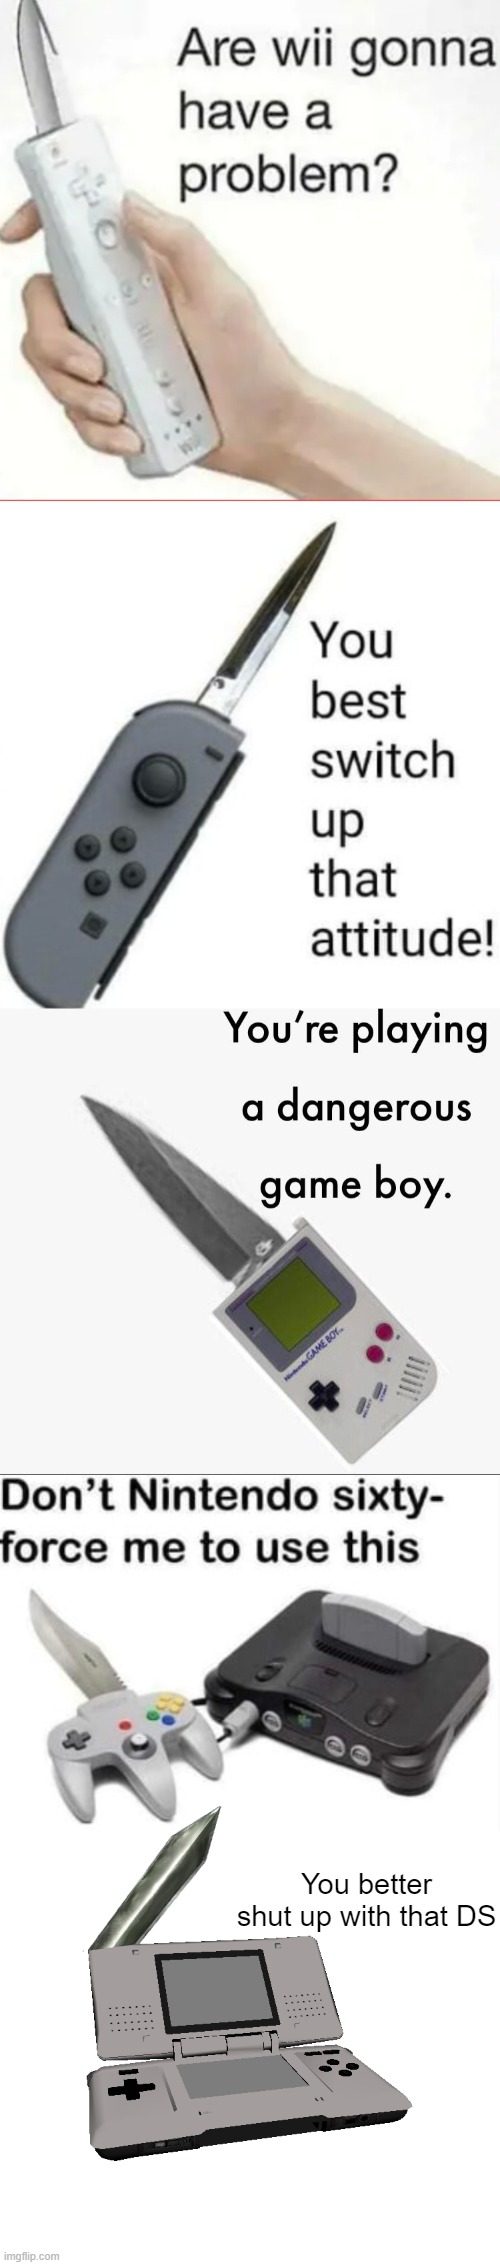 which one is the most clever? | You better shut up with that DS | image tagged in are wii gonna have a problem,you best switch up that attitude,your playing a dangerous gameboy,nintendo ds | made w/ Imgflip meme maker